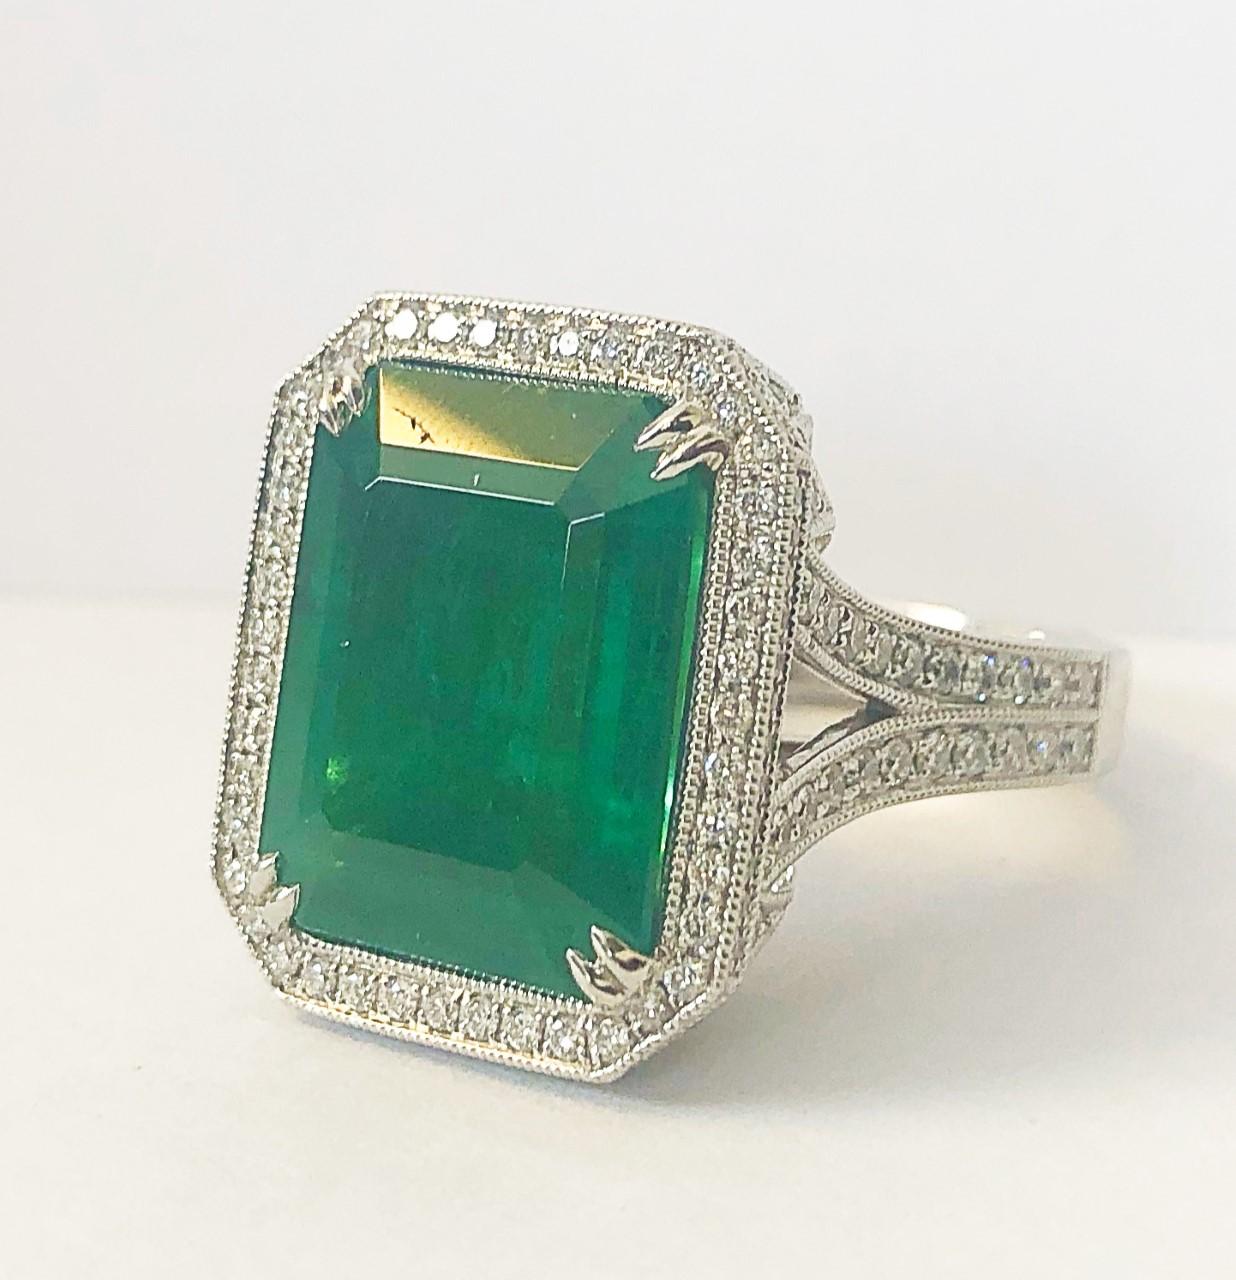 Fine Emerald and Diamond Ring 
Set with an octagonal emerald weighing approximately 12.42 carats, set in Platinum and 18kt yellow gold with 172 near colorless round brilliants.
Accompanied by GIA report no. 2191893414, dated 14th December 2018
21.72